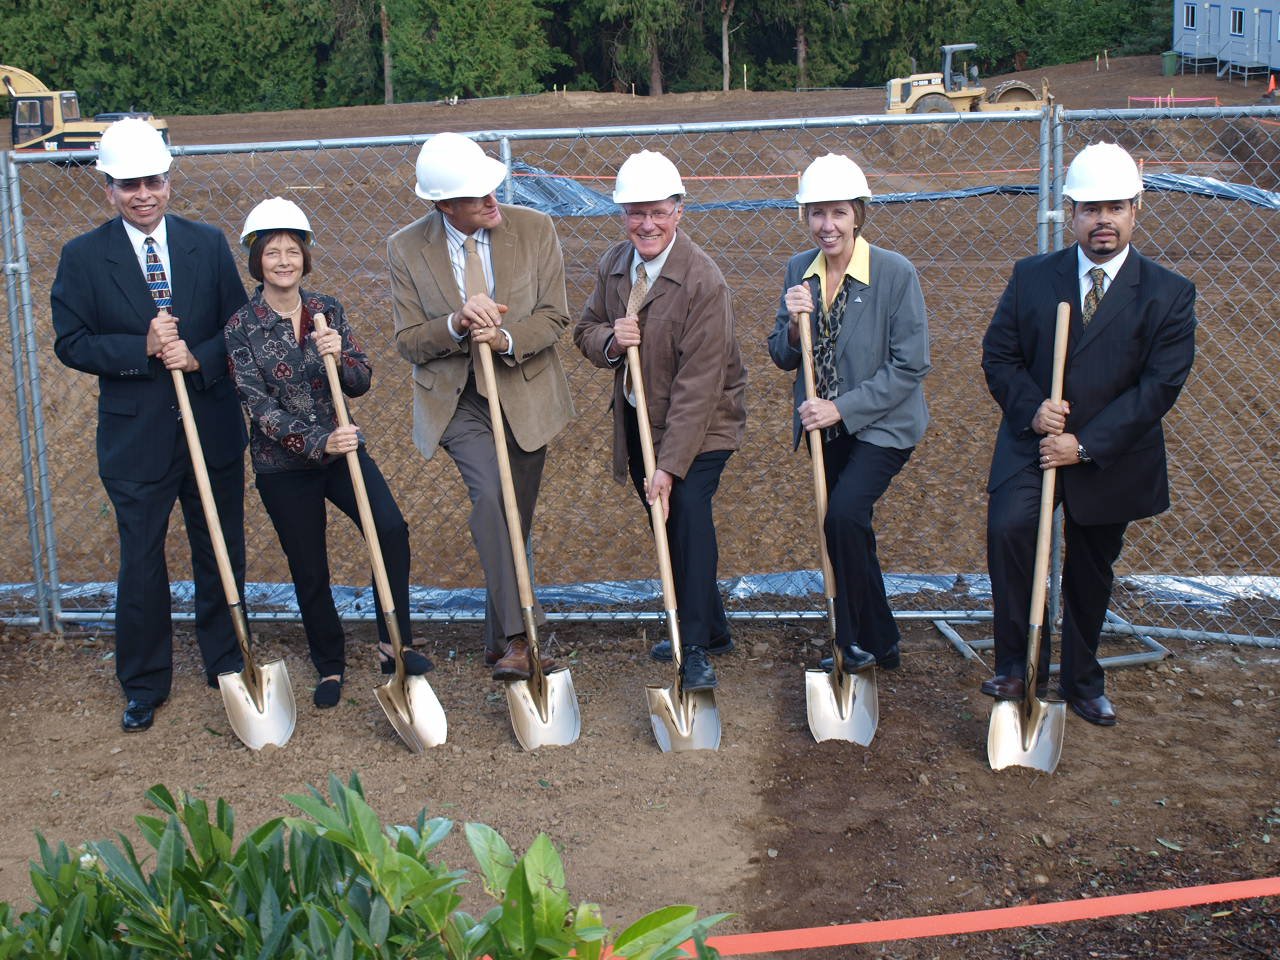 In 2009, breaking ground on Creekside Woods Apartments.